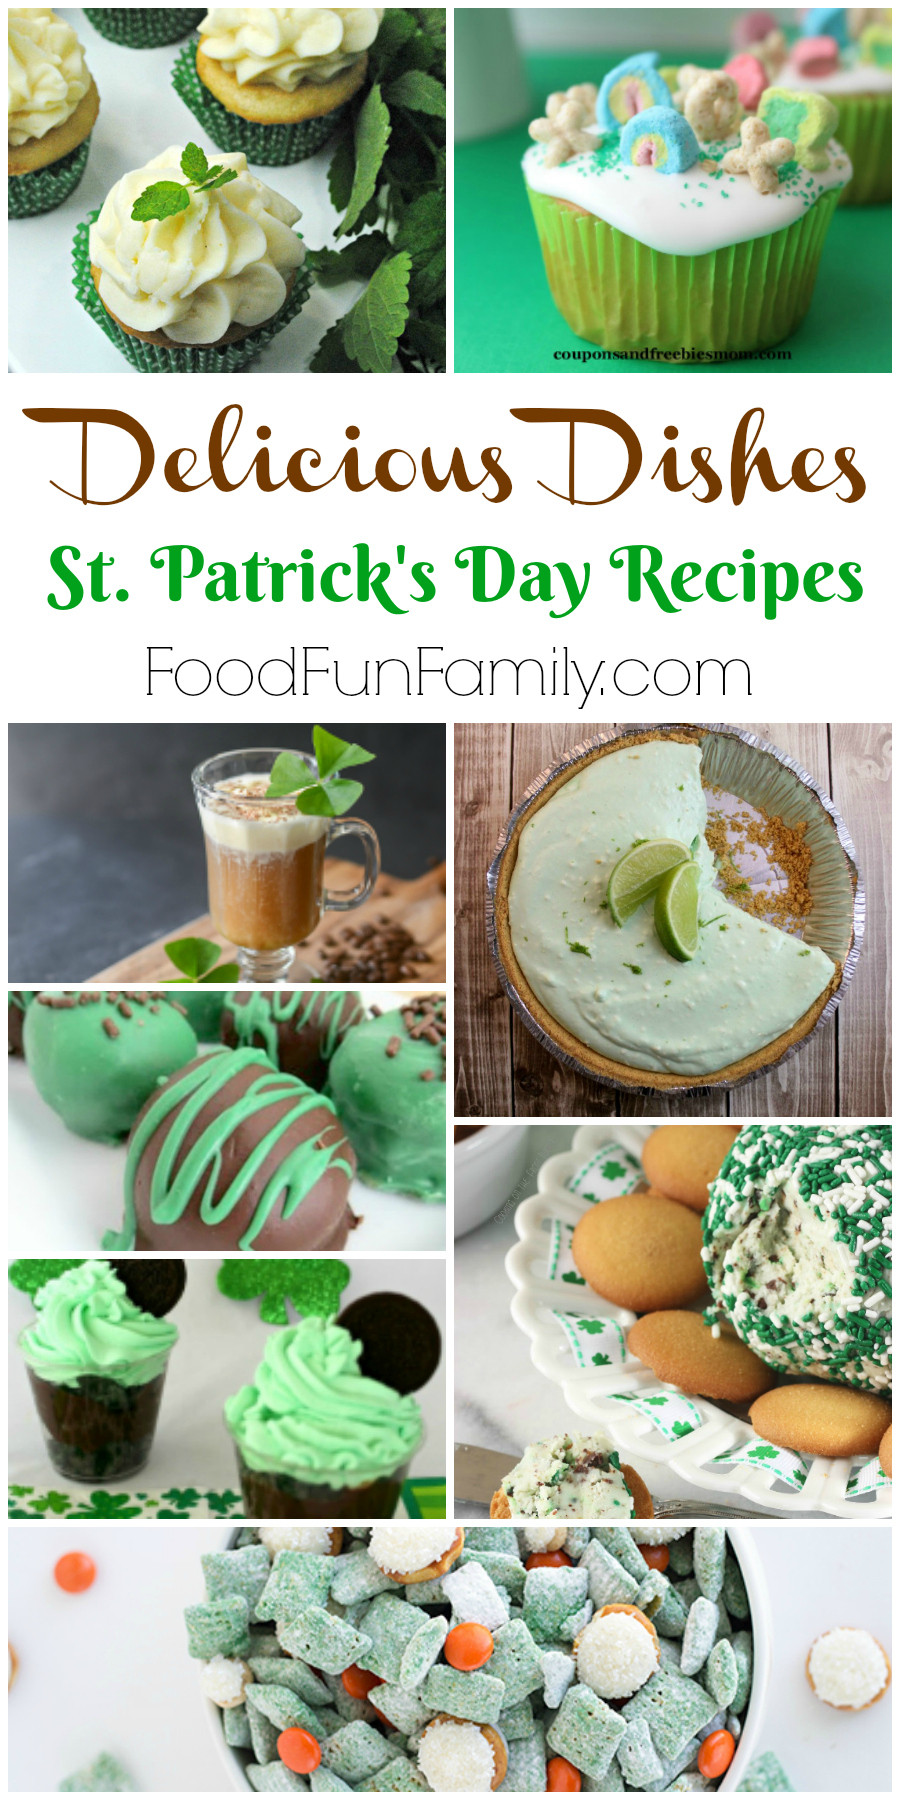 St Patrick Day Food Recipes
 Festive St Patrick’s Day Recipes – Delicious Dishes